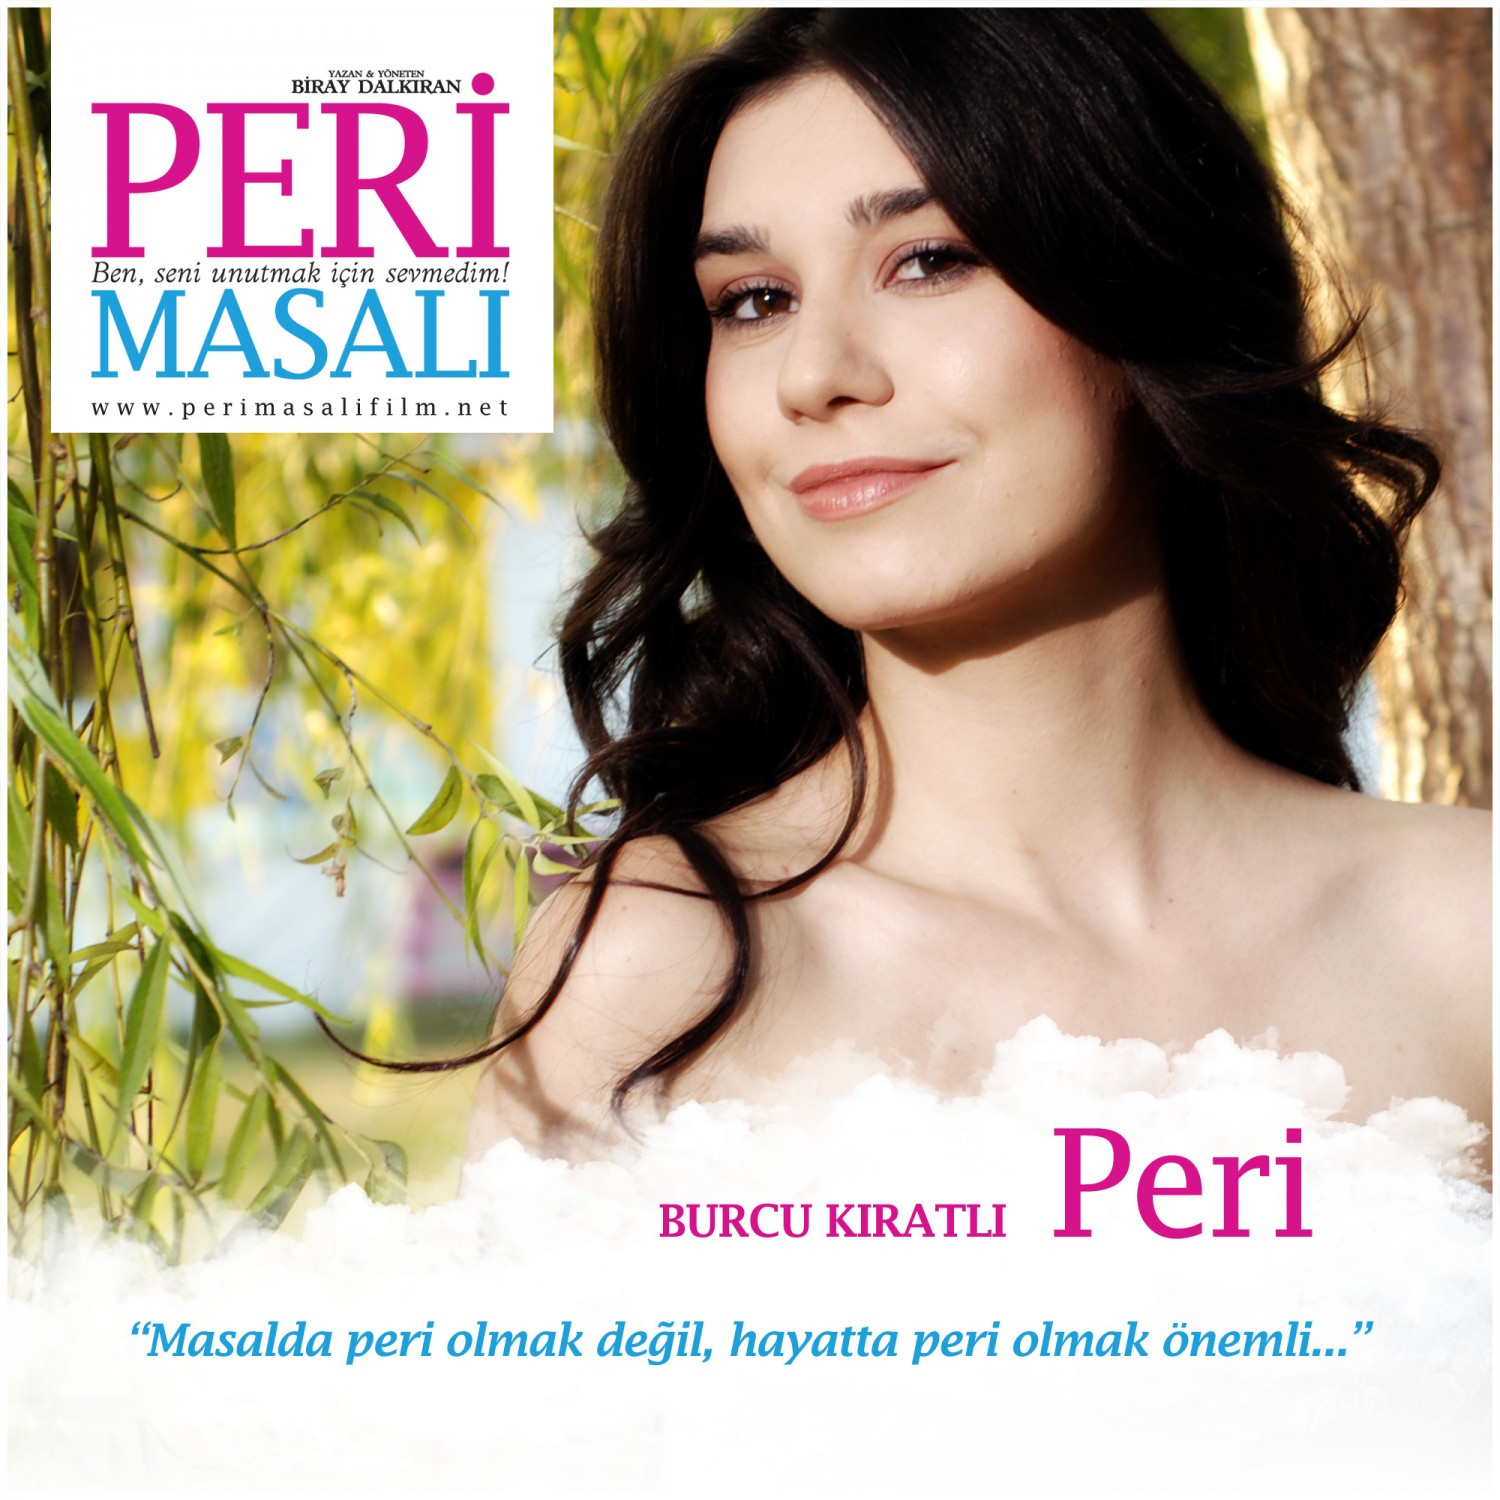 Extra Large Movie Poster Image for Peri Masali (#7 of 9)